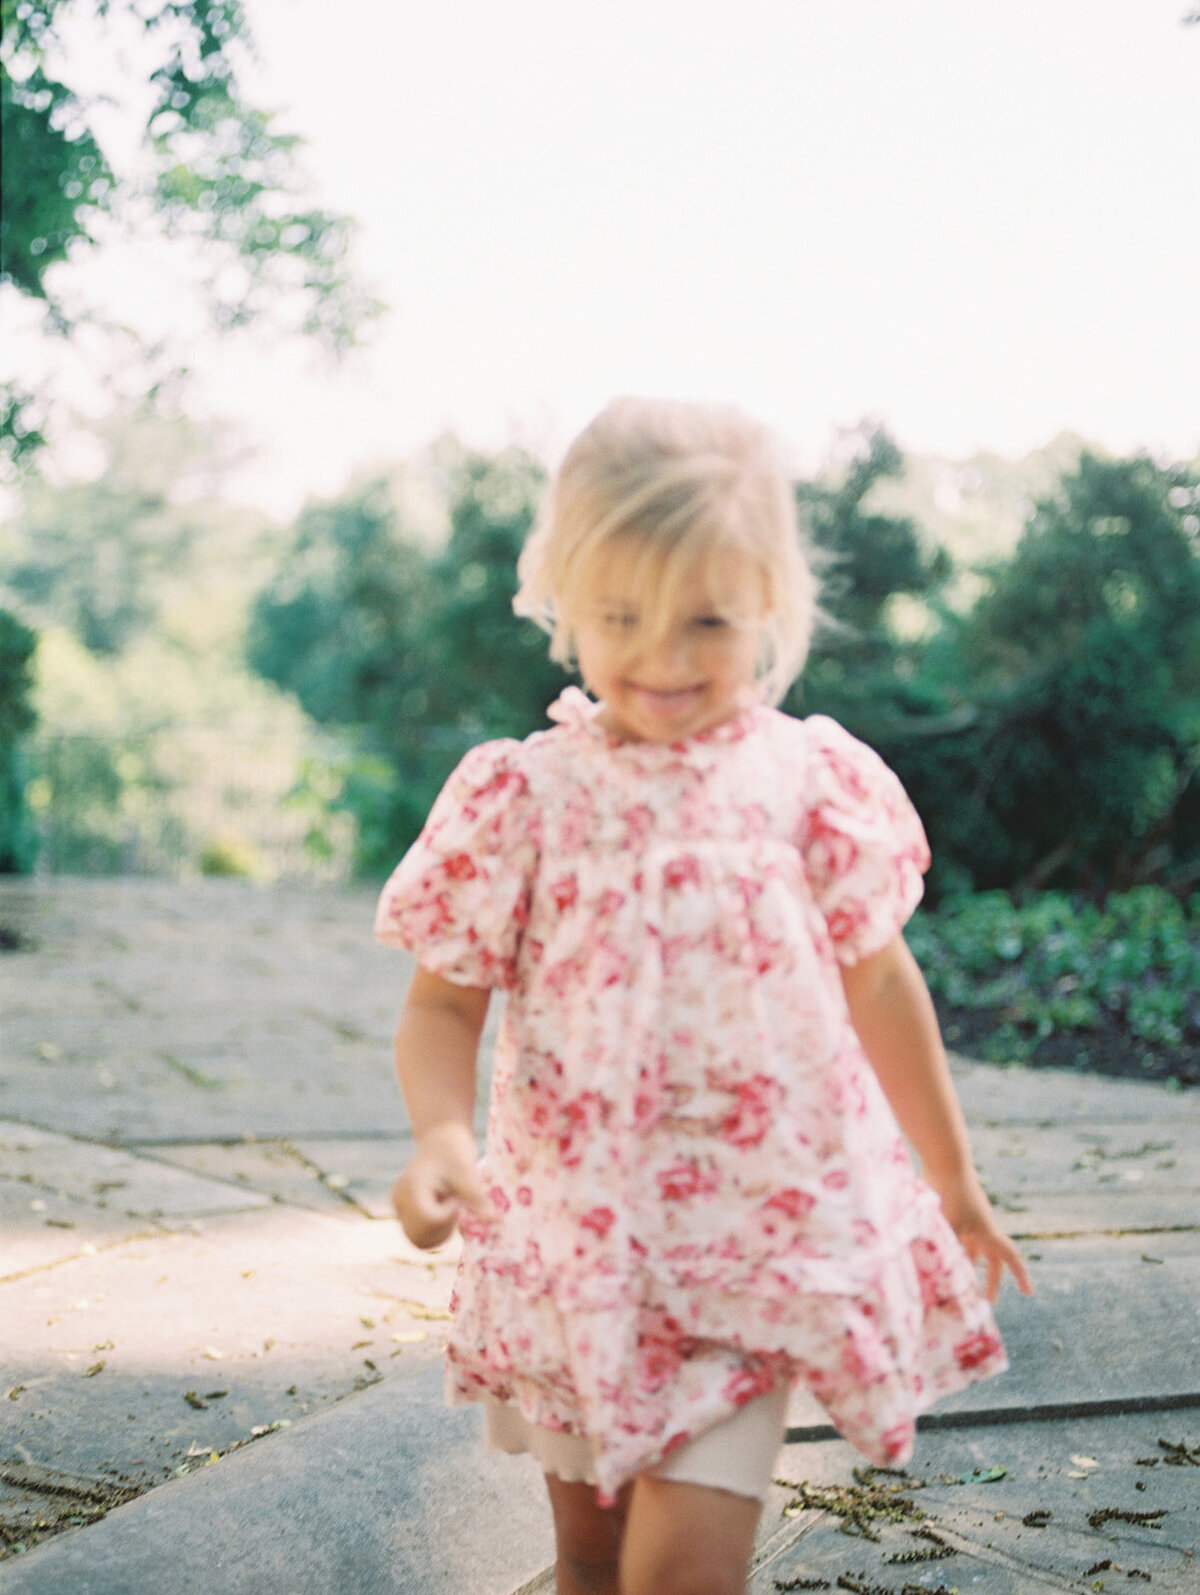 Blonde little girl walks along a stone walkway, slightly out-of-focus.